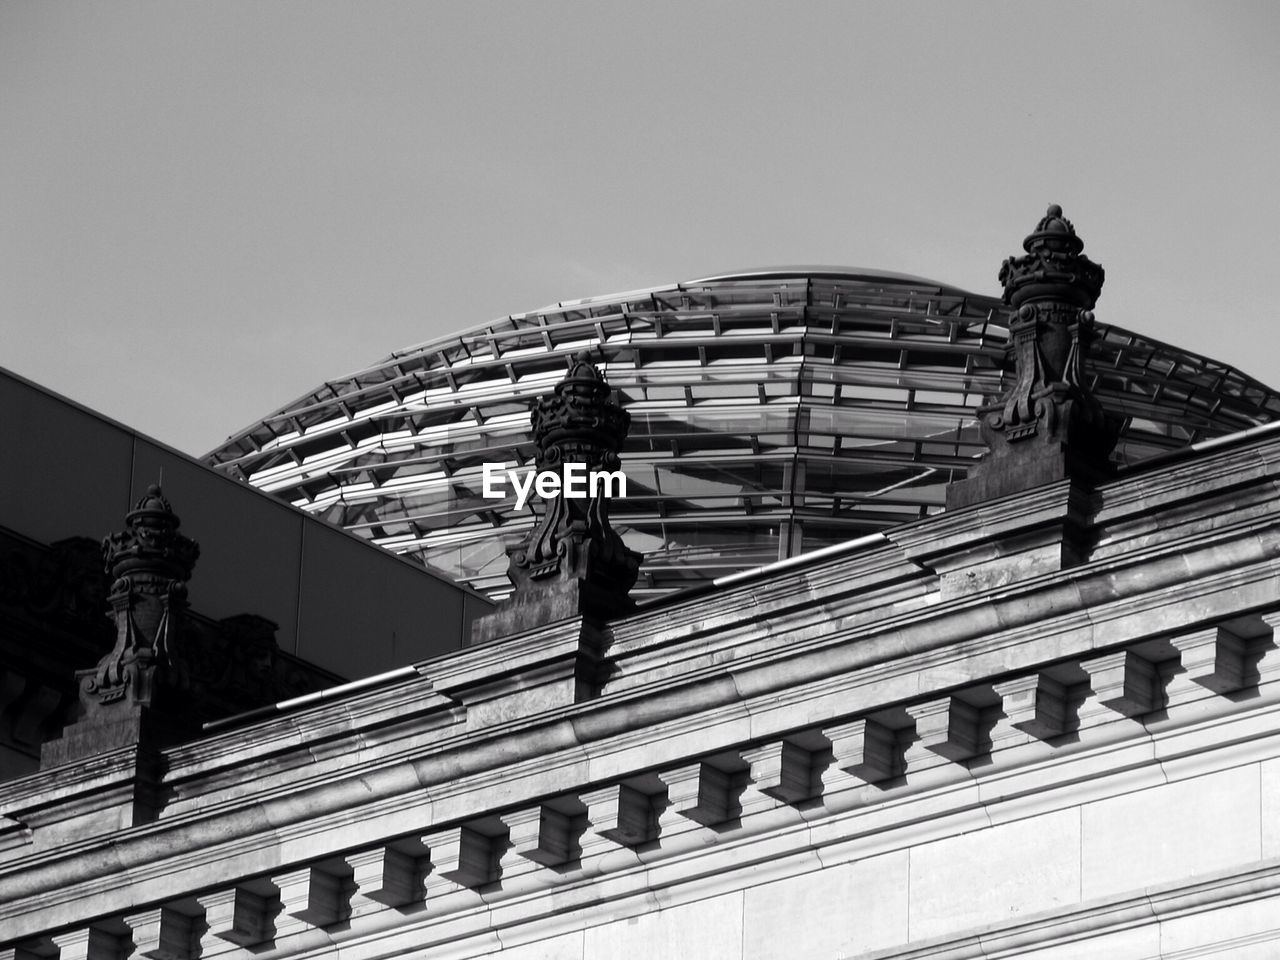 The top of the reichstag in berlin.